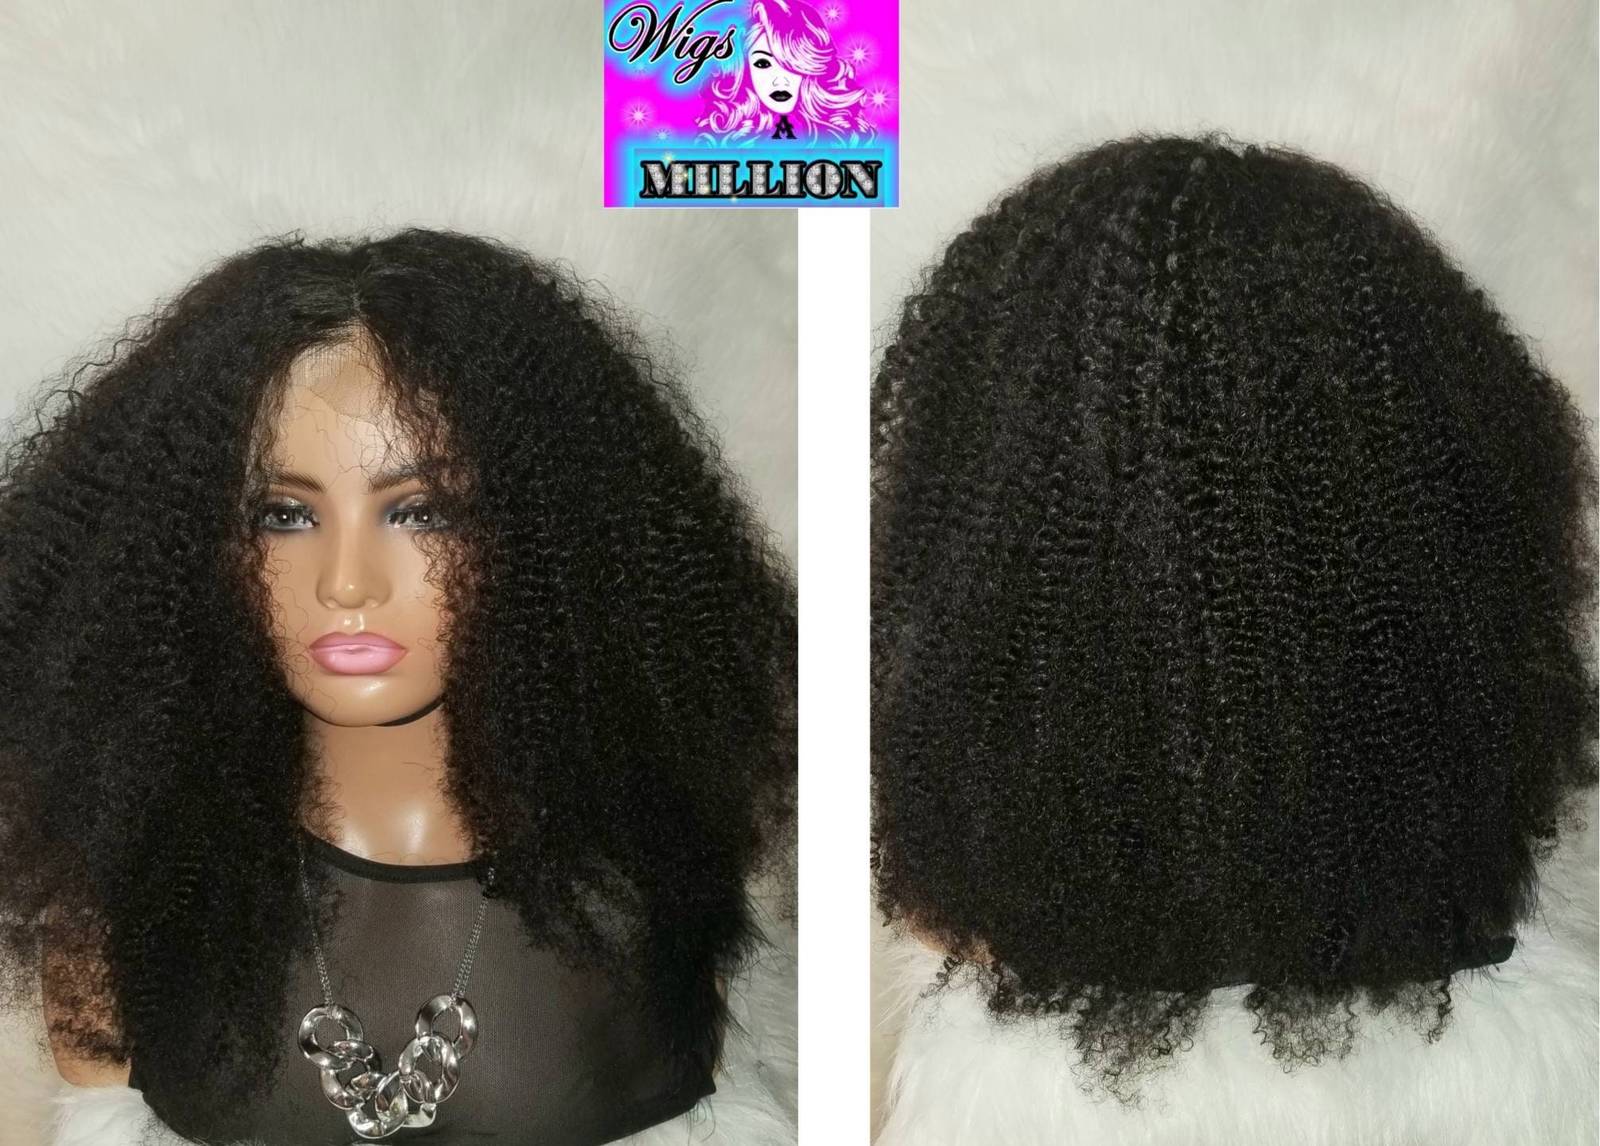 Tootie" Brazilian Afro Kinky Curly Wig, 13x6 Lace Front Human hair 24 inches Glu - $300.00